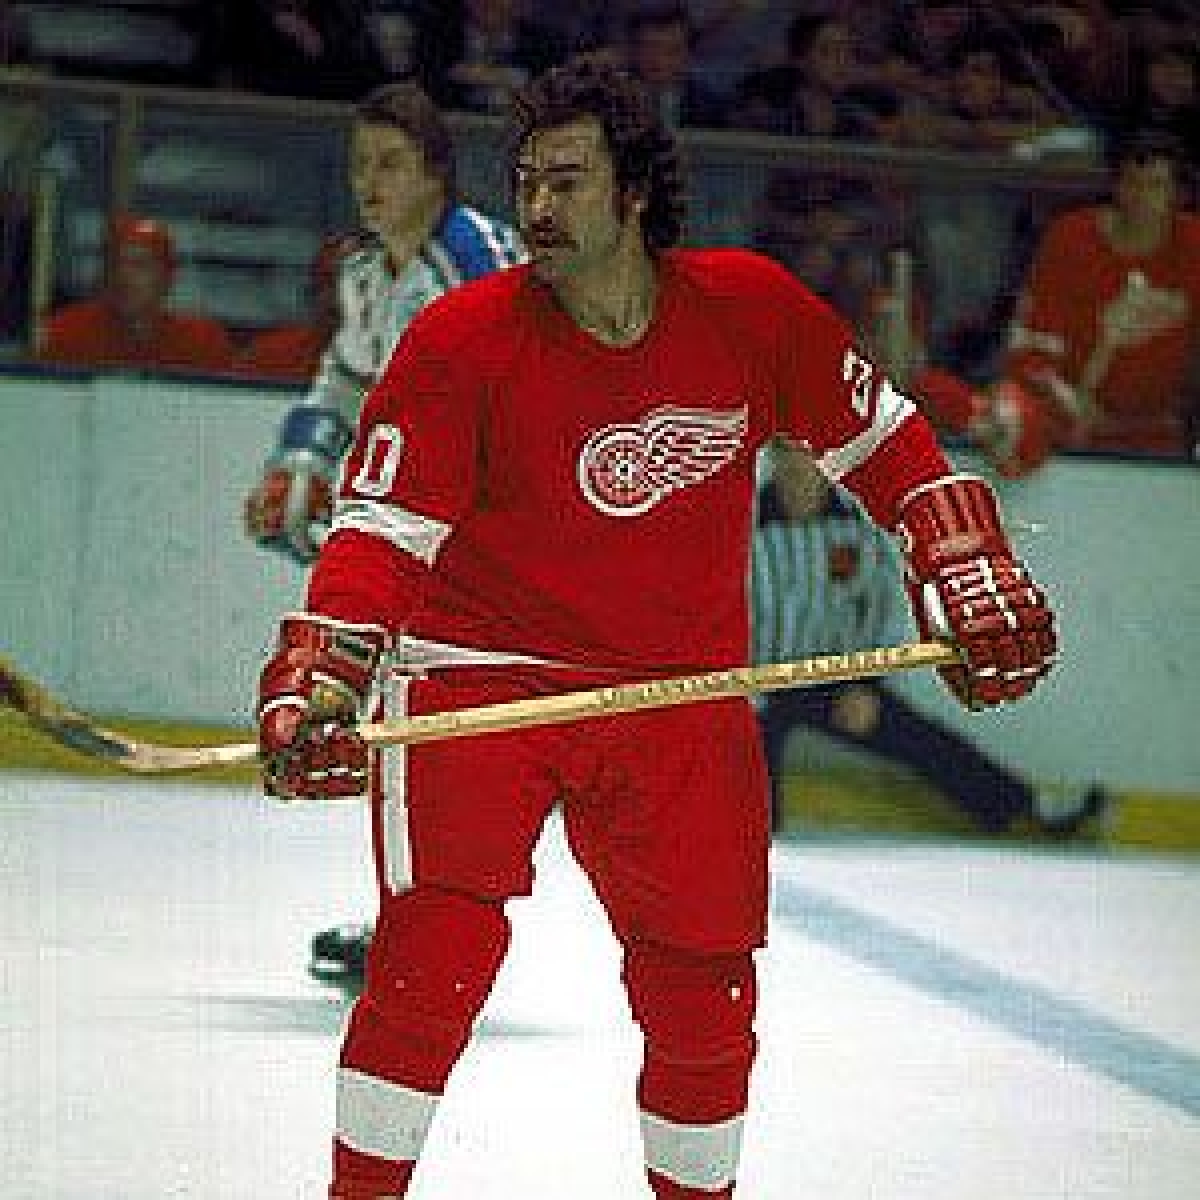 Mickey Redmond: First To 50 For The Detroit Red Wings